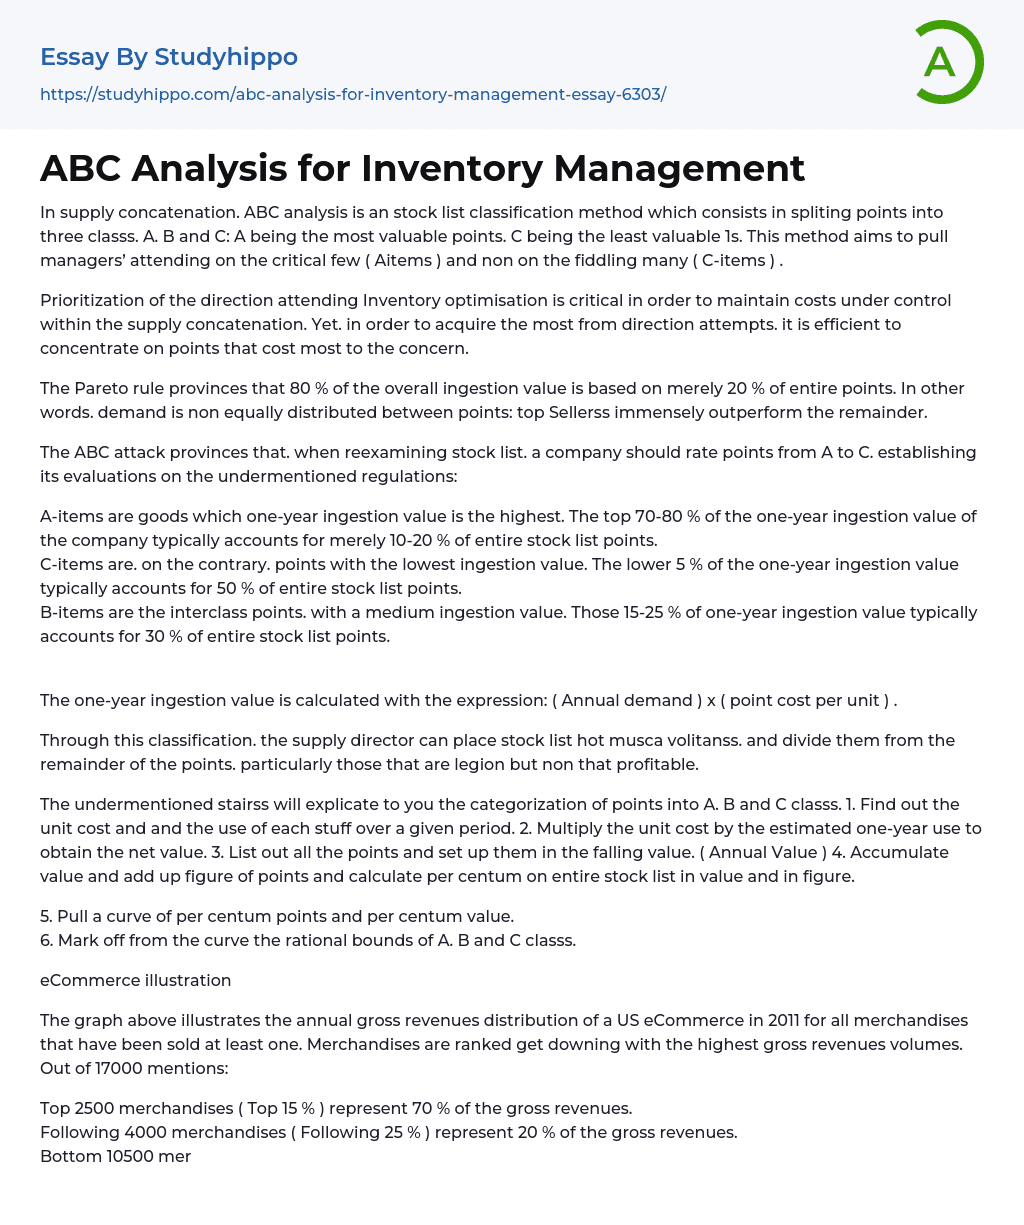 ABC Analysis for Inventory Management